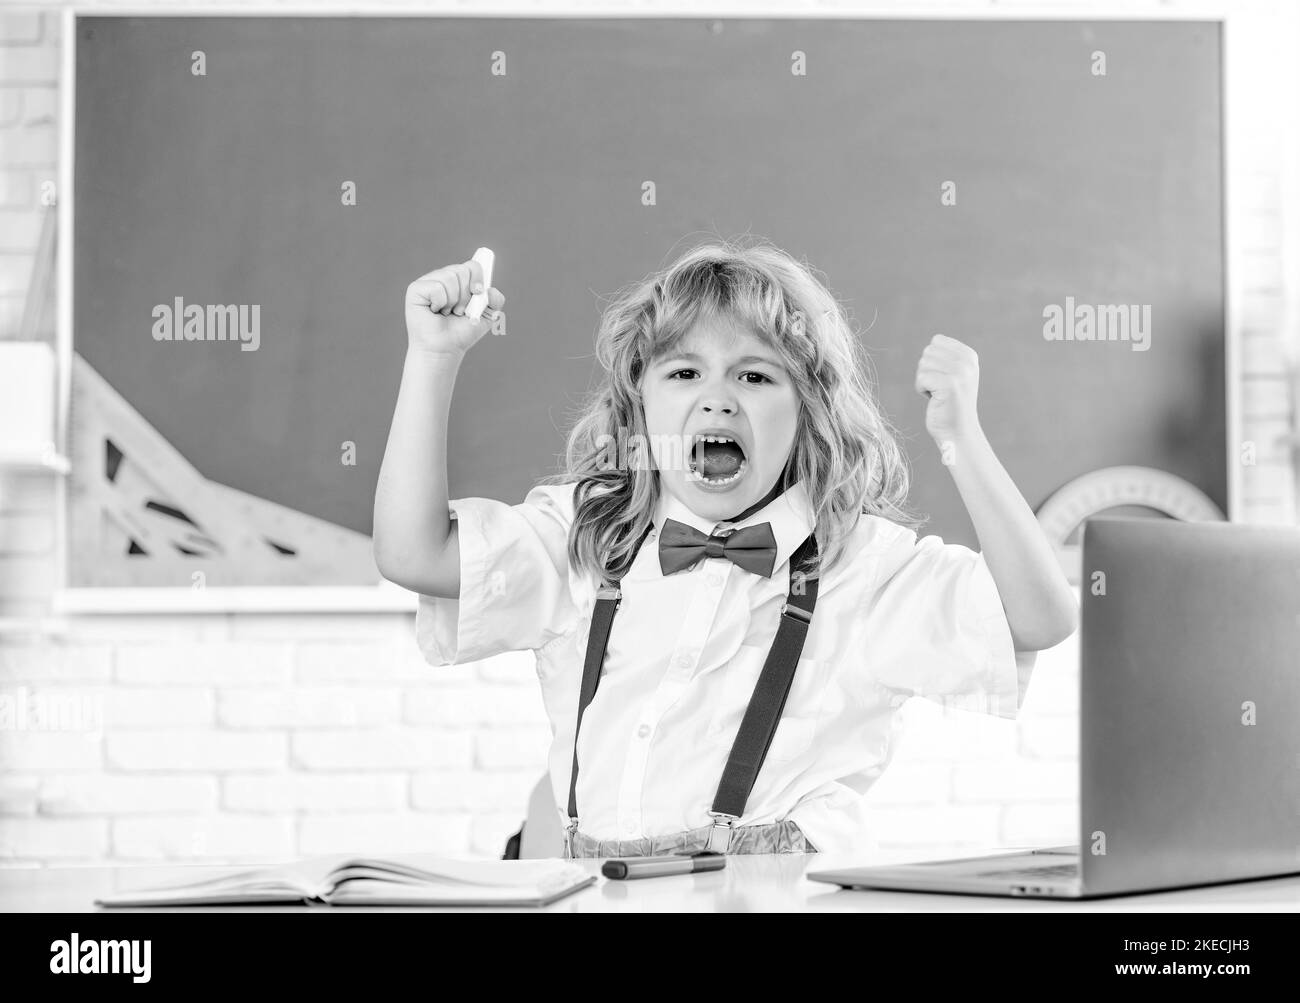 concept of education. nerd kid with long hair at blackboard. september 1. Stock Photo